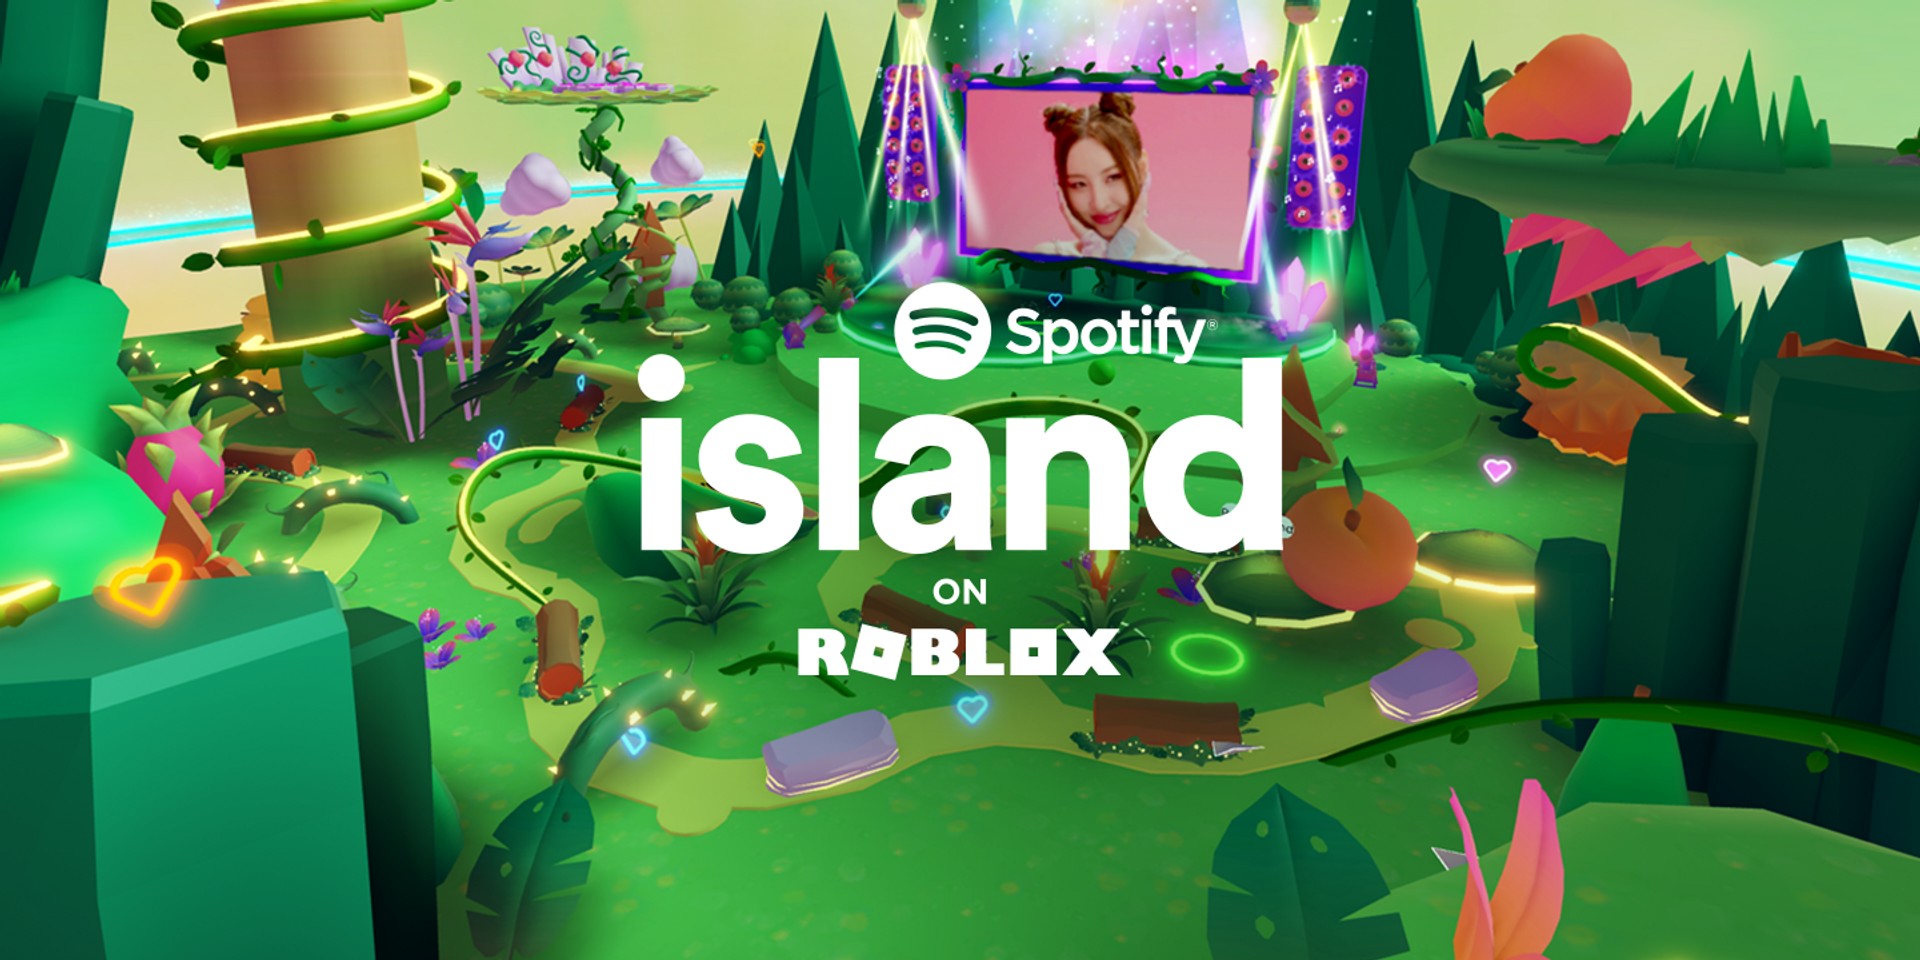 Spotify officially launches new island on Roblox